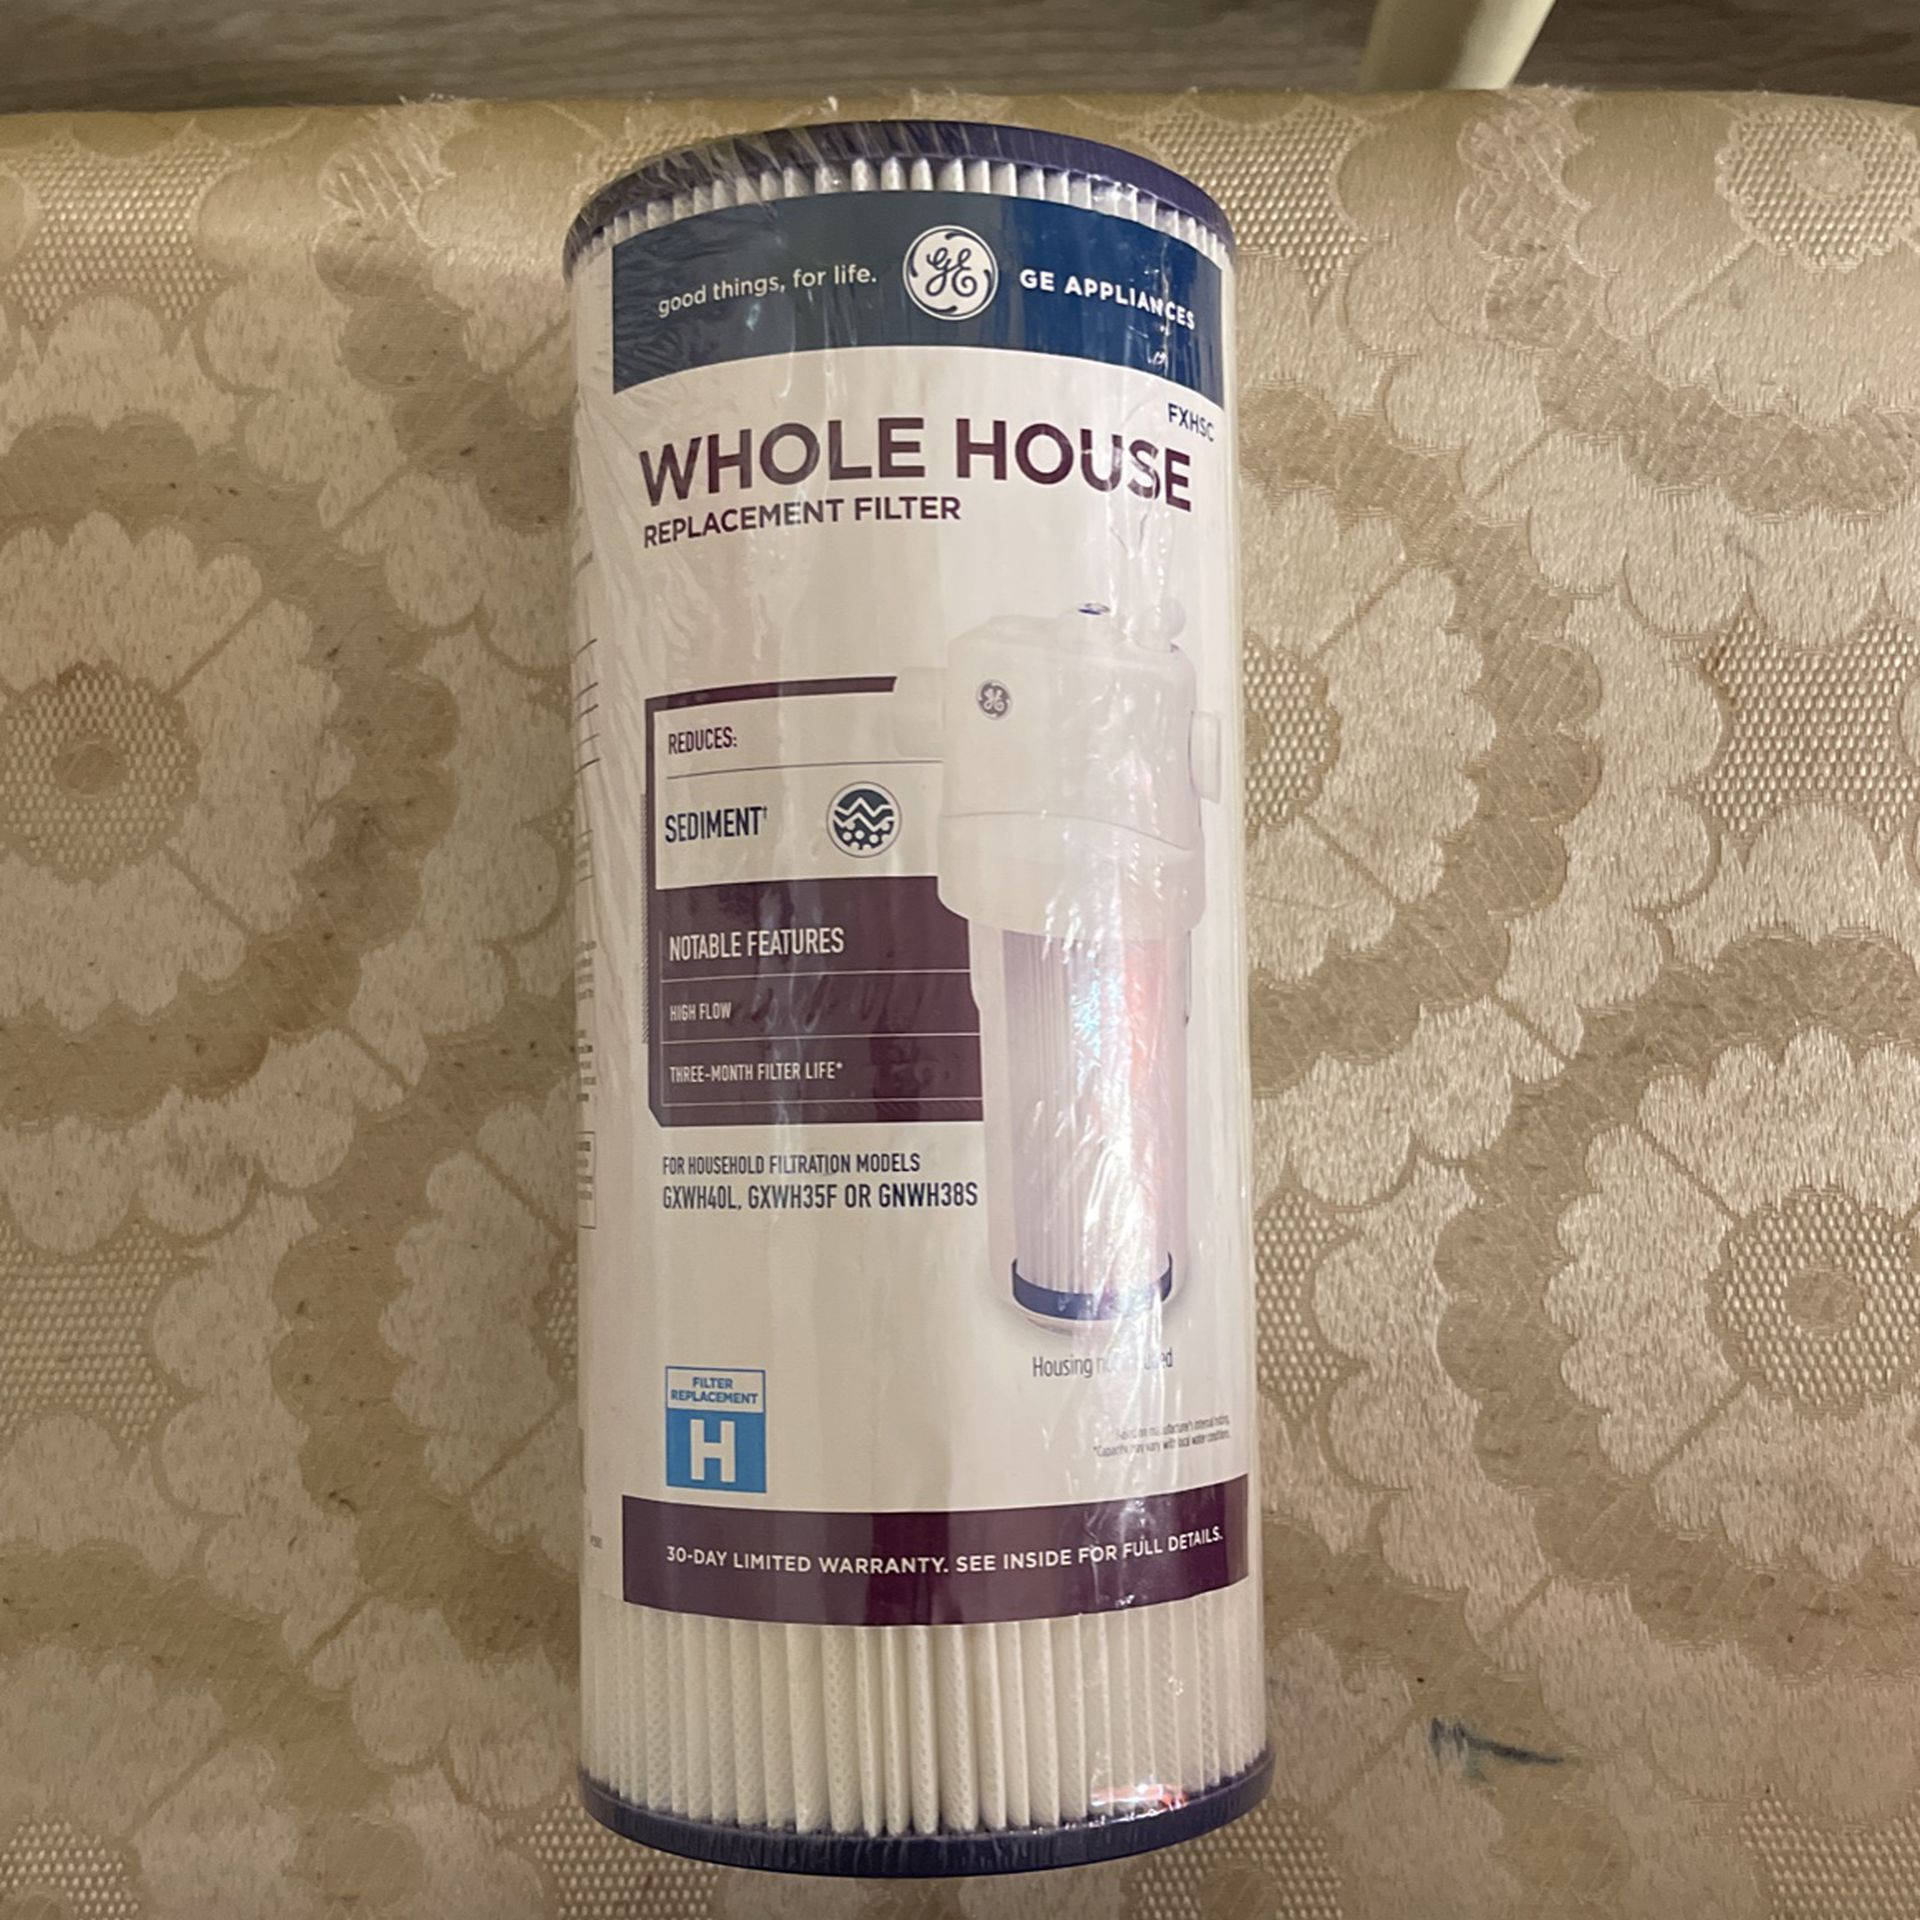 Whole House Replacement Filter